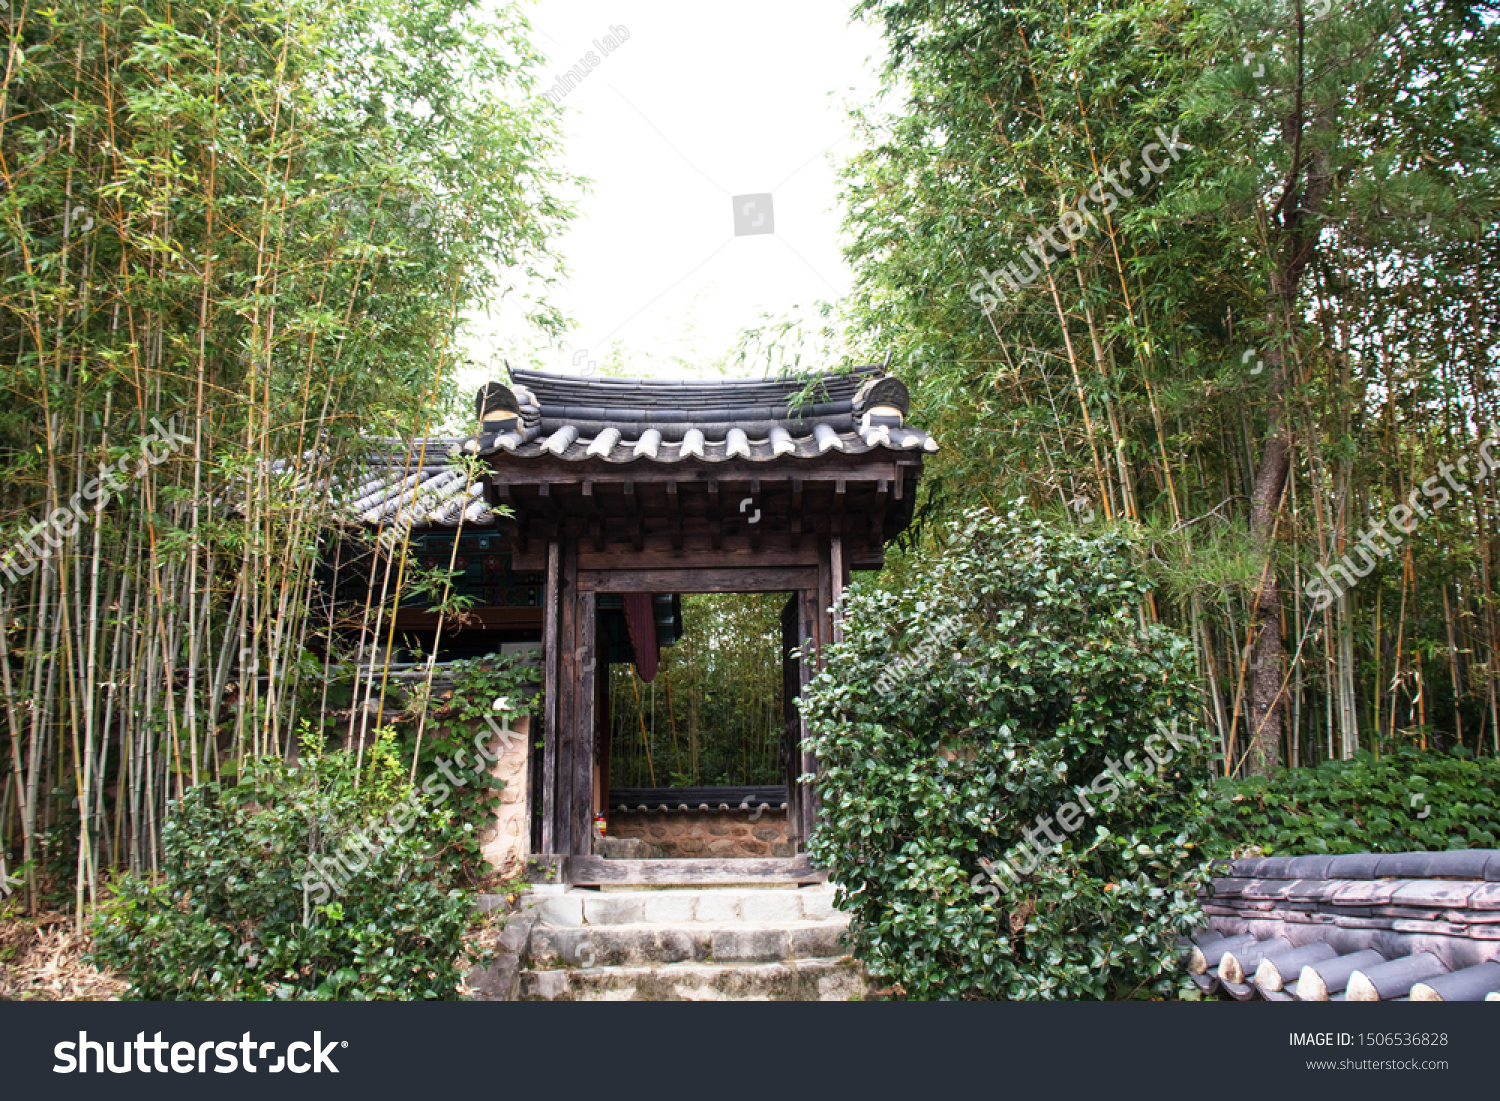 Traditional Tileroofed House Bamboo Forest Stock Photo Edit Now 1506536828